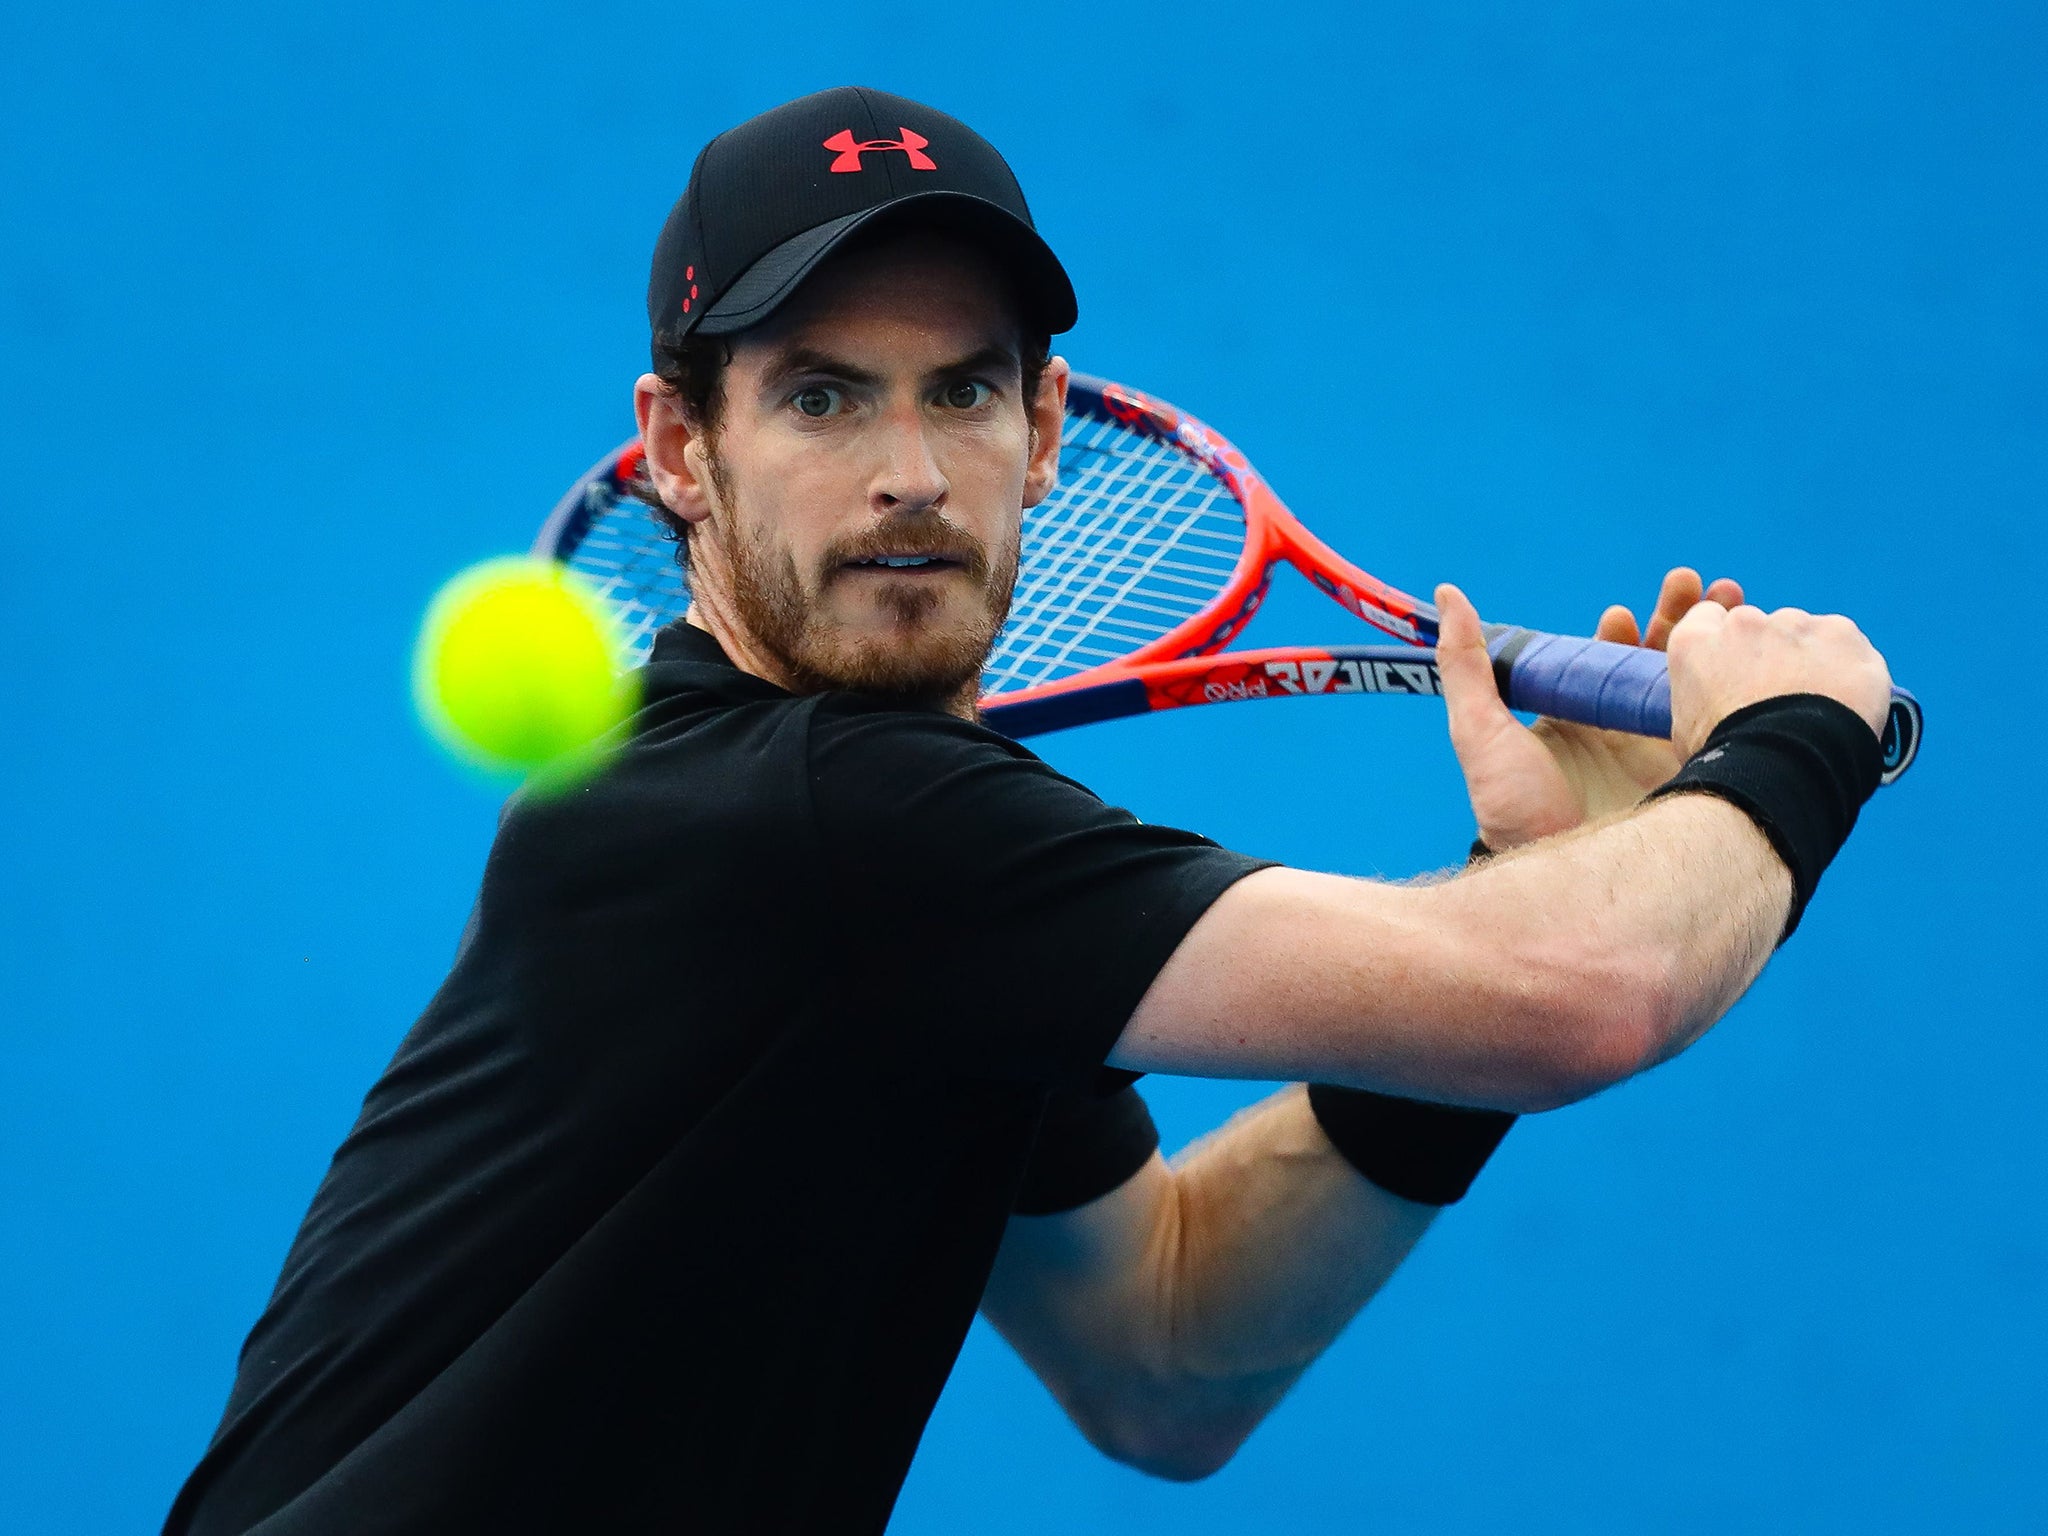 Andy Murray will return at the Rosmalen 250 in June after nearly 11 months out of the game